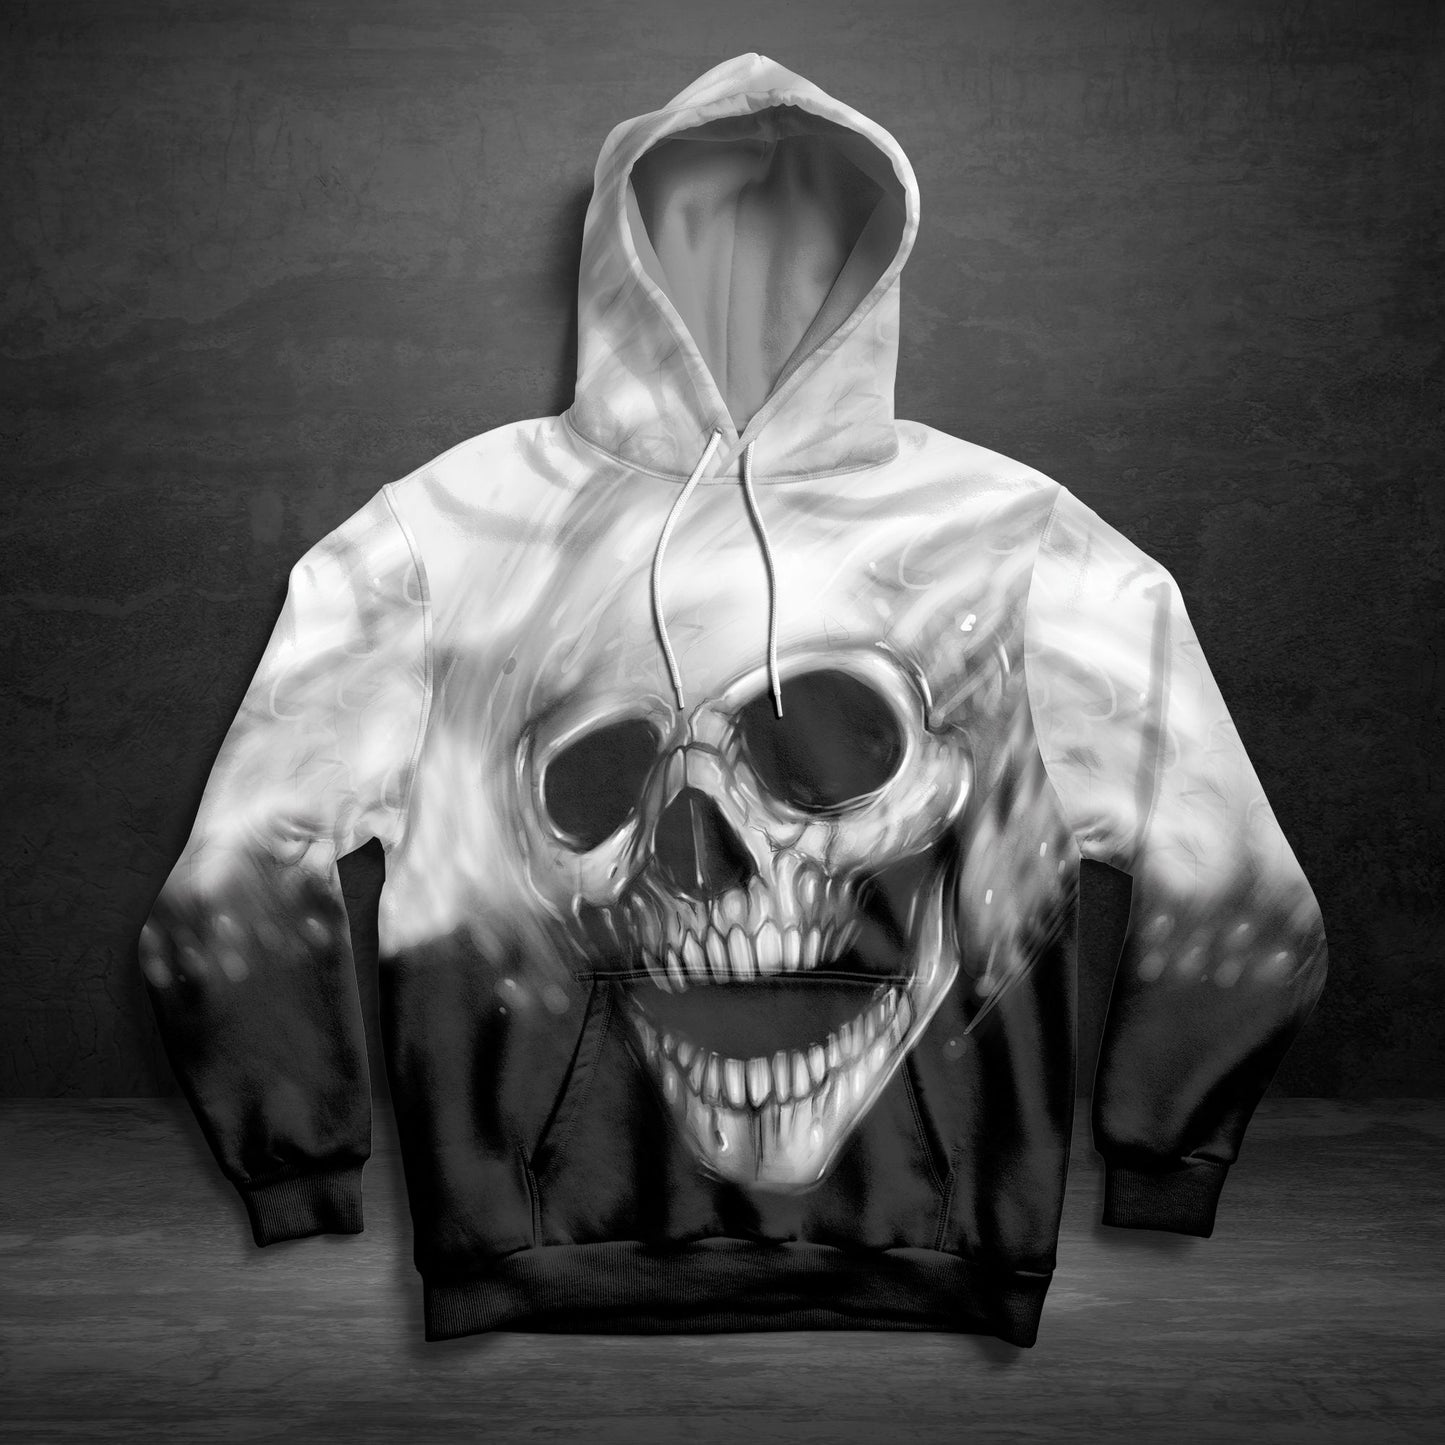 Awesome Skull G5828 - All Over Print Unisex Hoodie